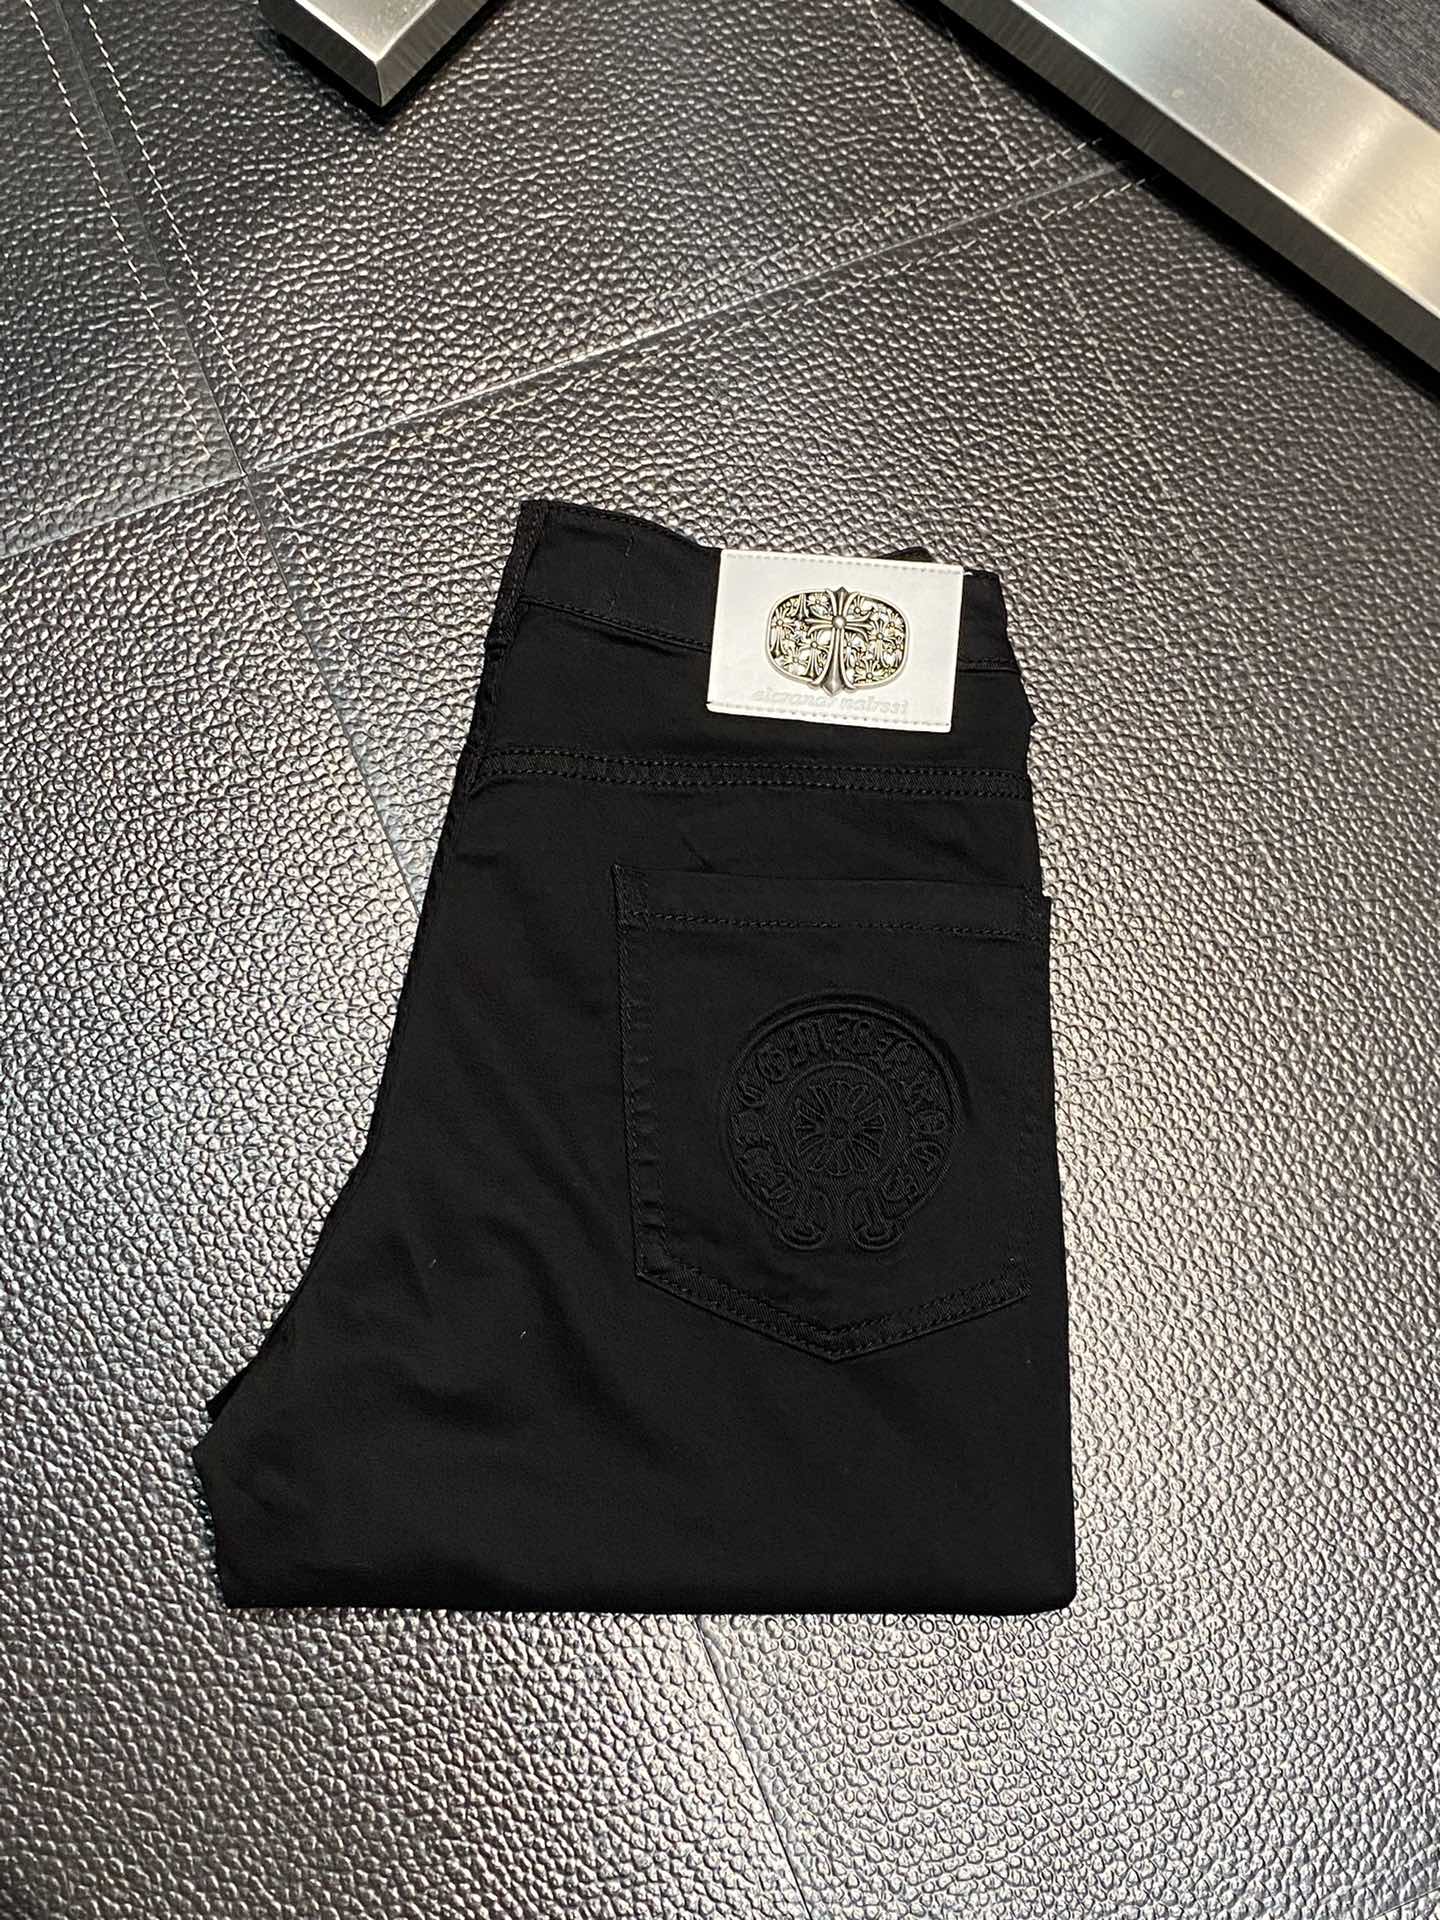 Chrome Hearts Clothing Jeans Shorts AAA Class Replica
 Casual